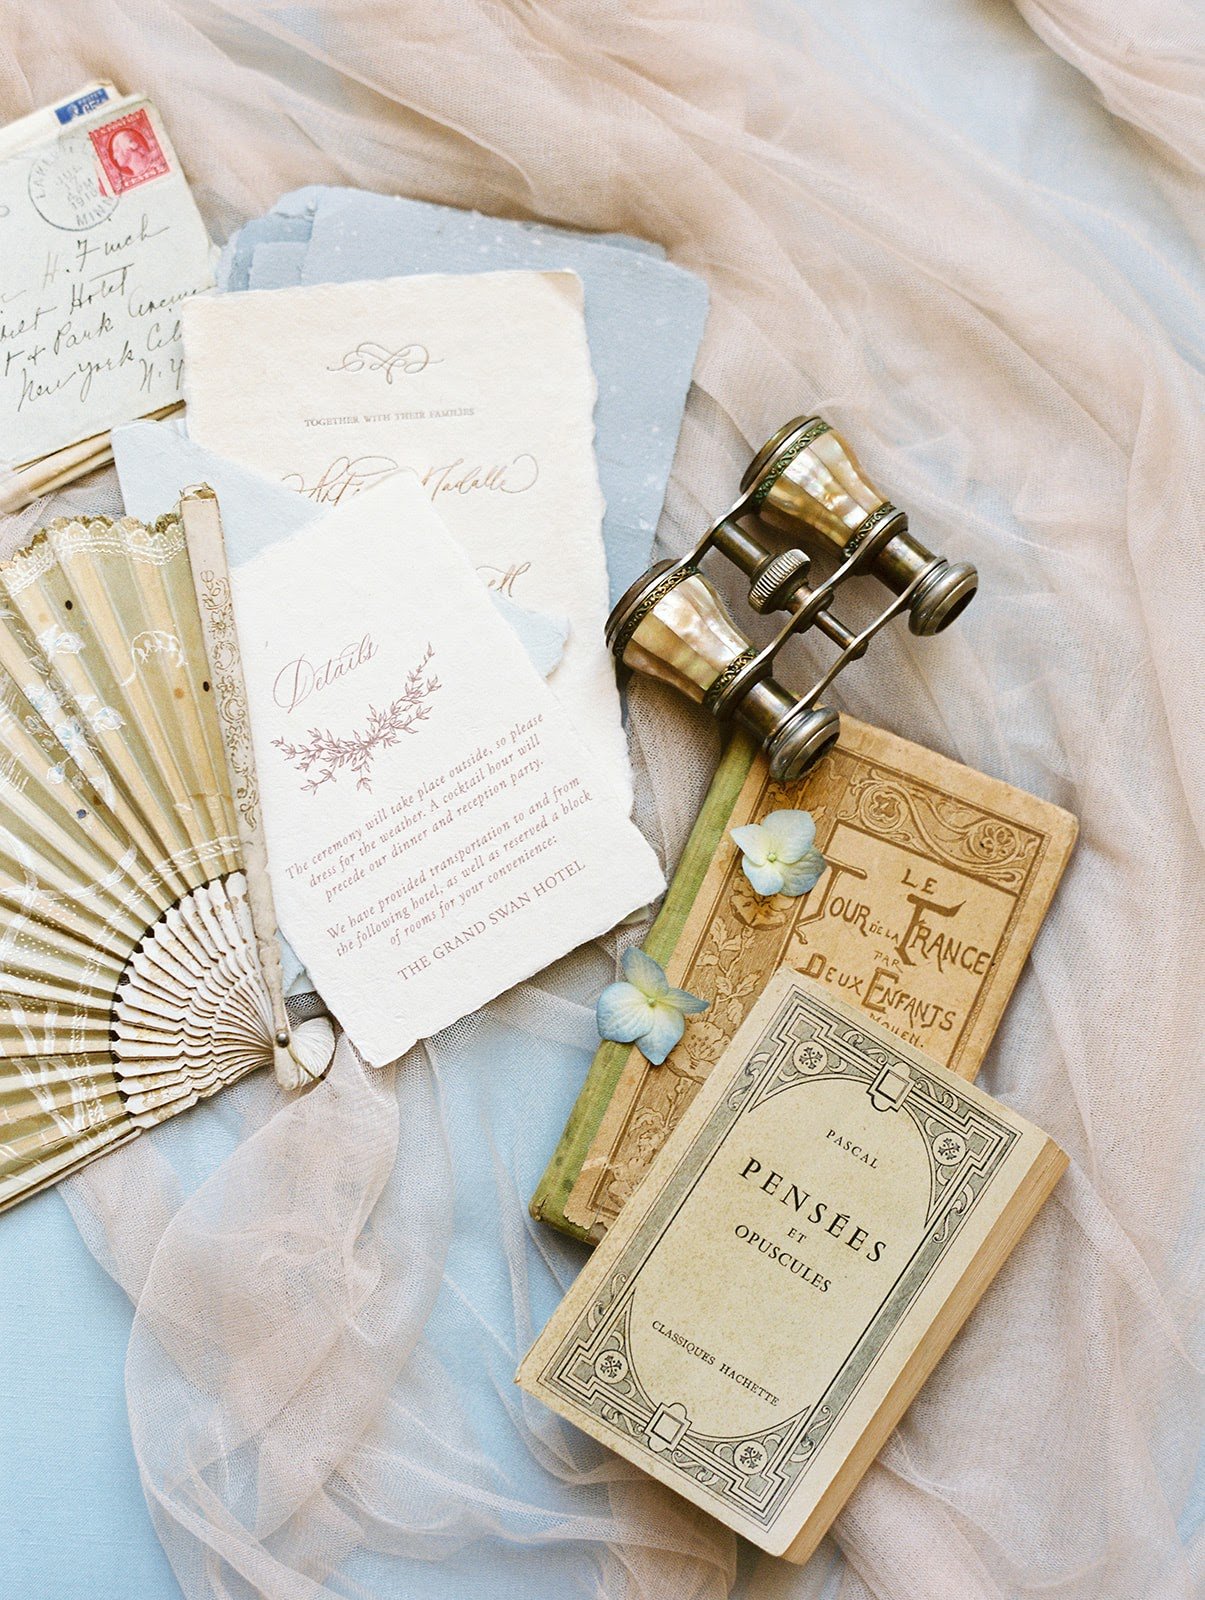 A book, fan and wedding invitation displayed on a bed in a French chateau wedding venue.